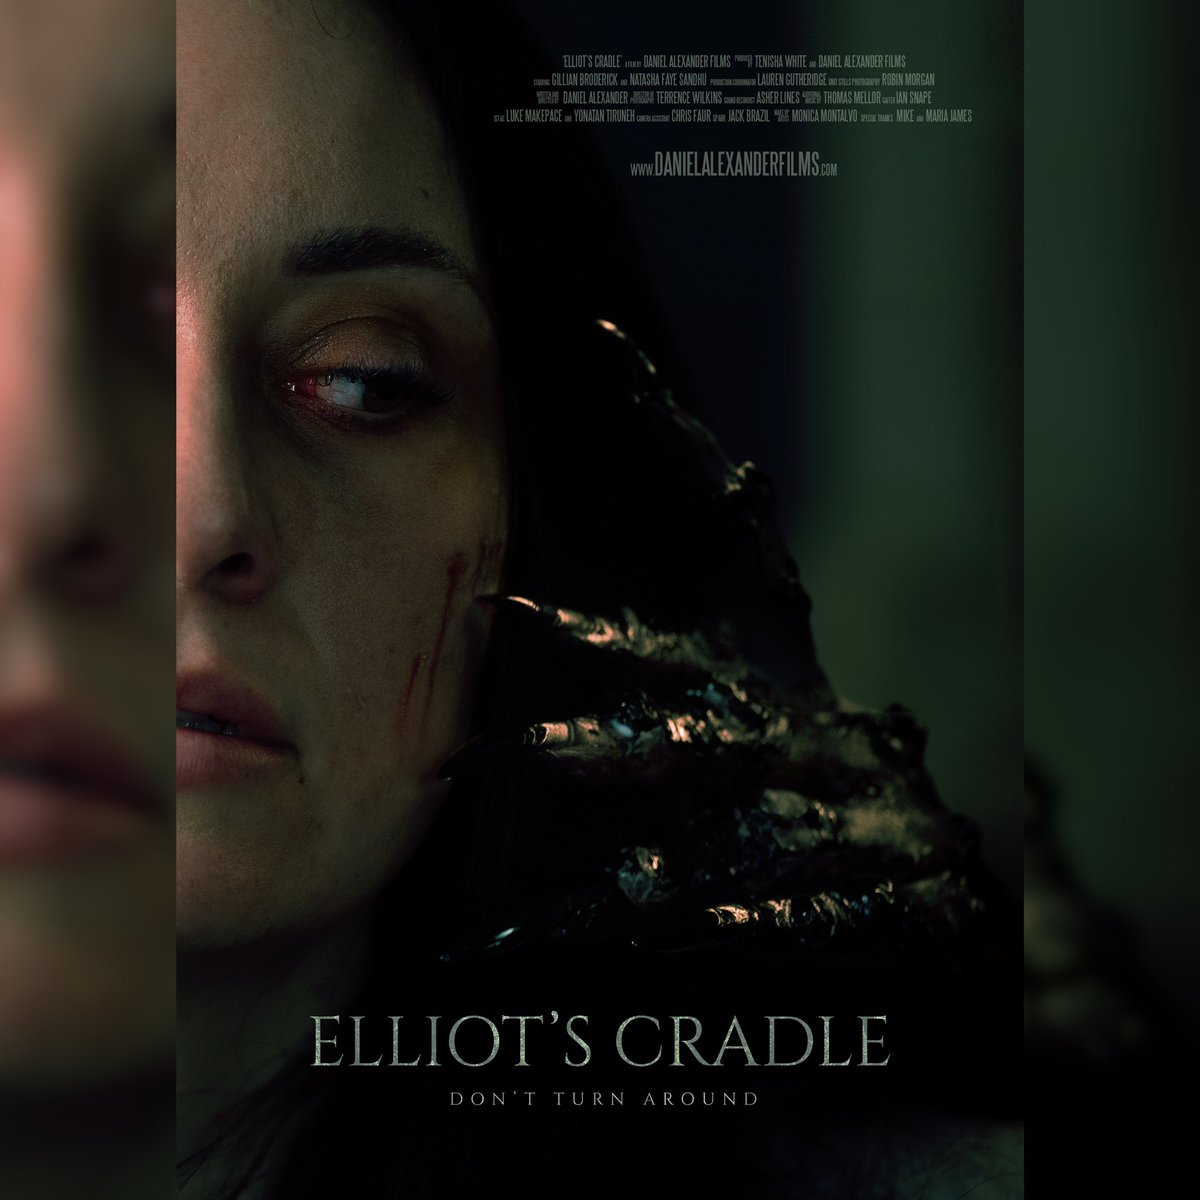 We had a great time shooting our new short horror film “Elliot’s Cradle”, which was an excuse to work with my brilliant team, test out the new Arri Alexa 35 cam, & have some crazy fun in between some of the bigger projects. Please take a look here. 🙏🏾 youtu.be/q9vdhxQiiR0?si…